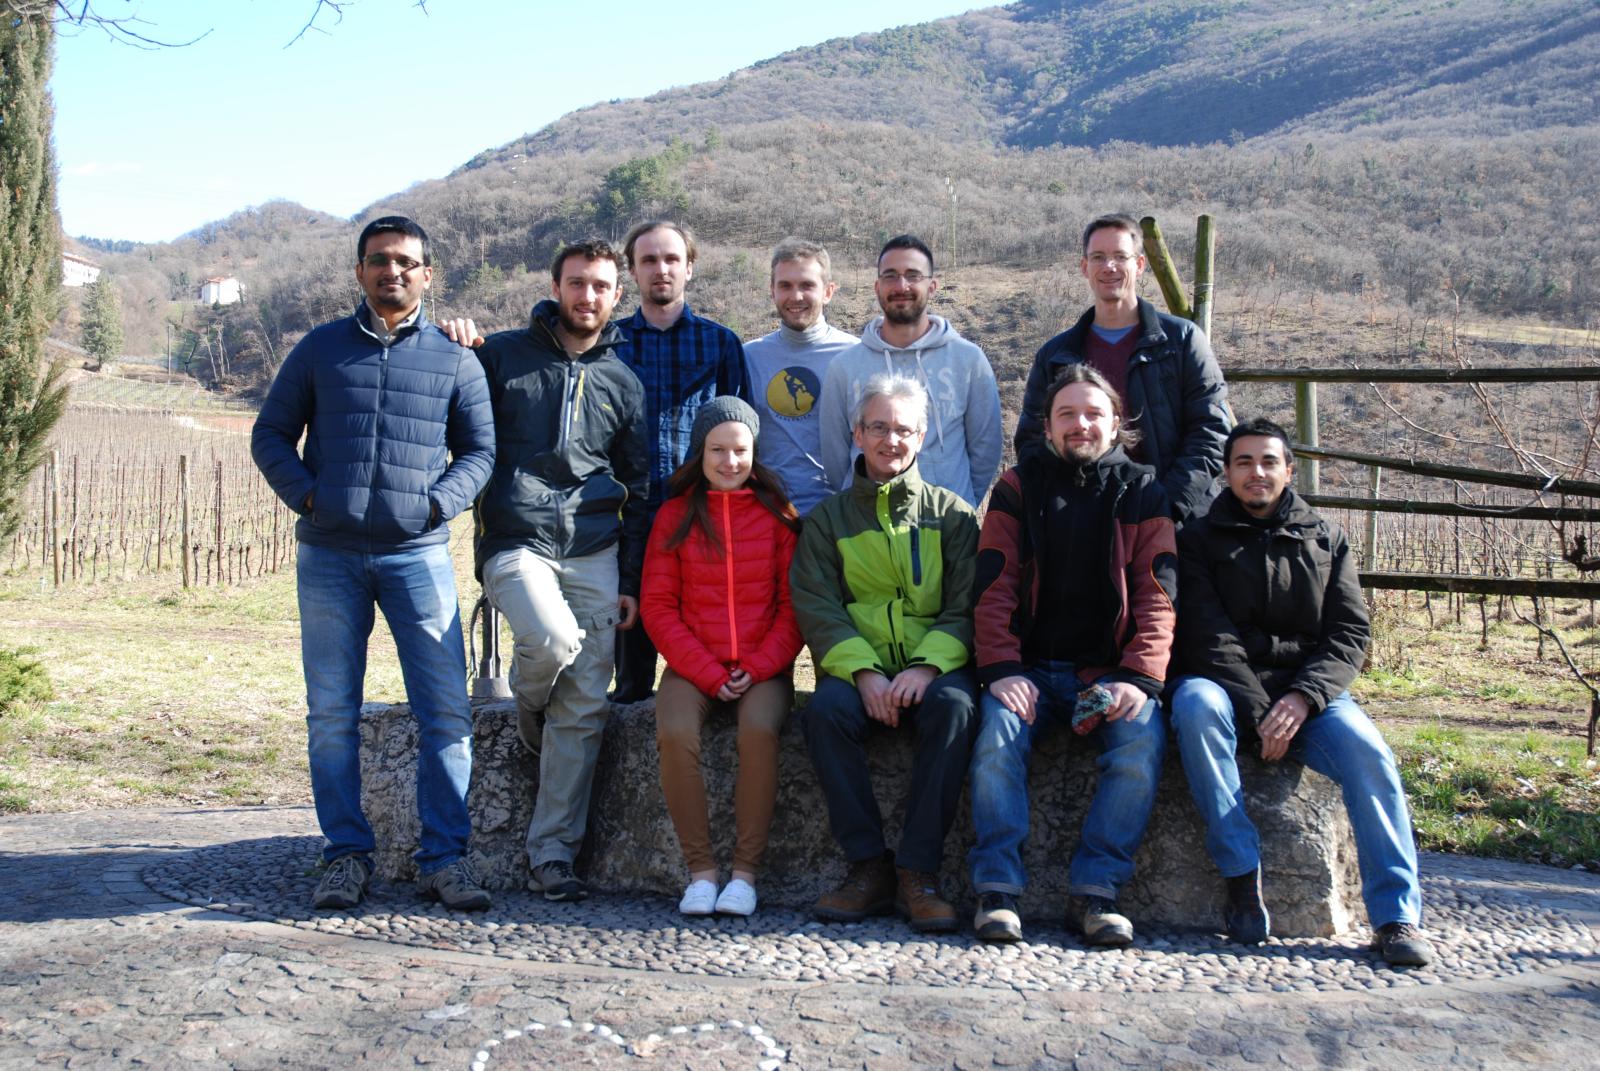 Thumbnail for File:GRASS GIS contributors meetings in San Michele February 2016.jpg